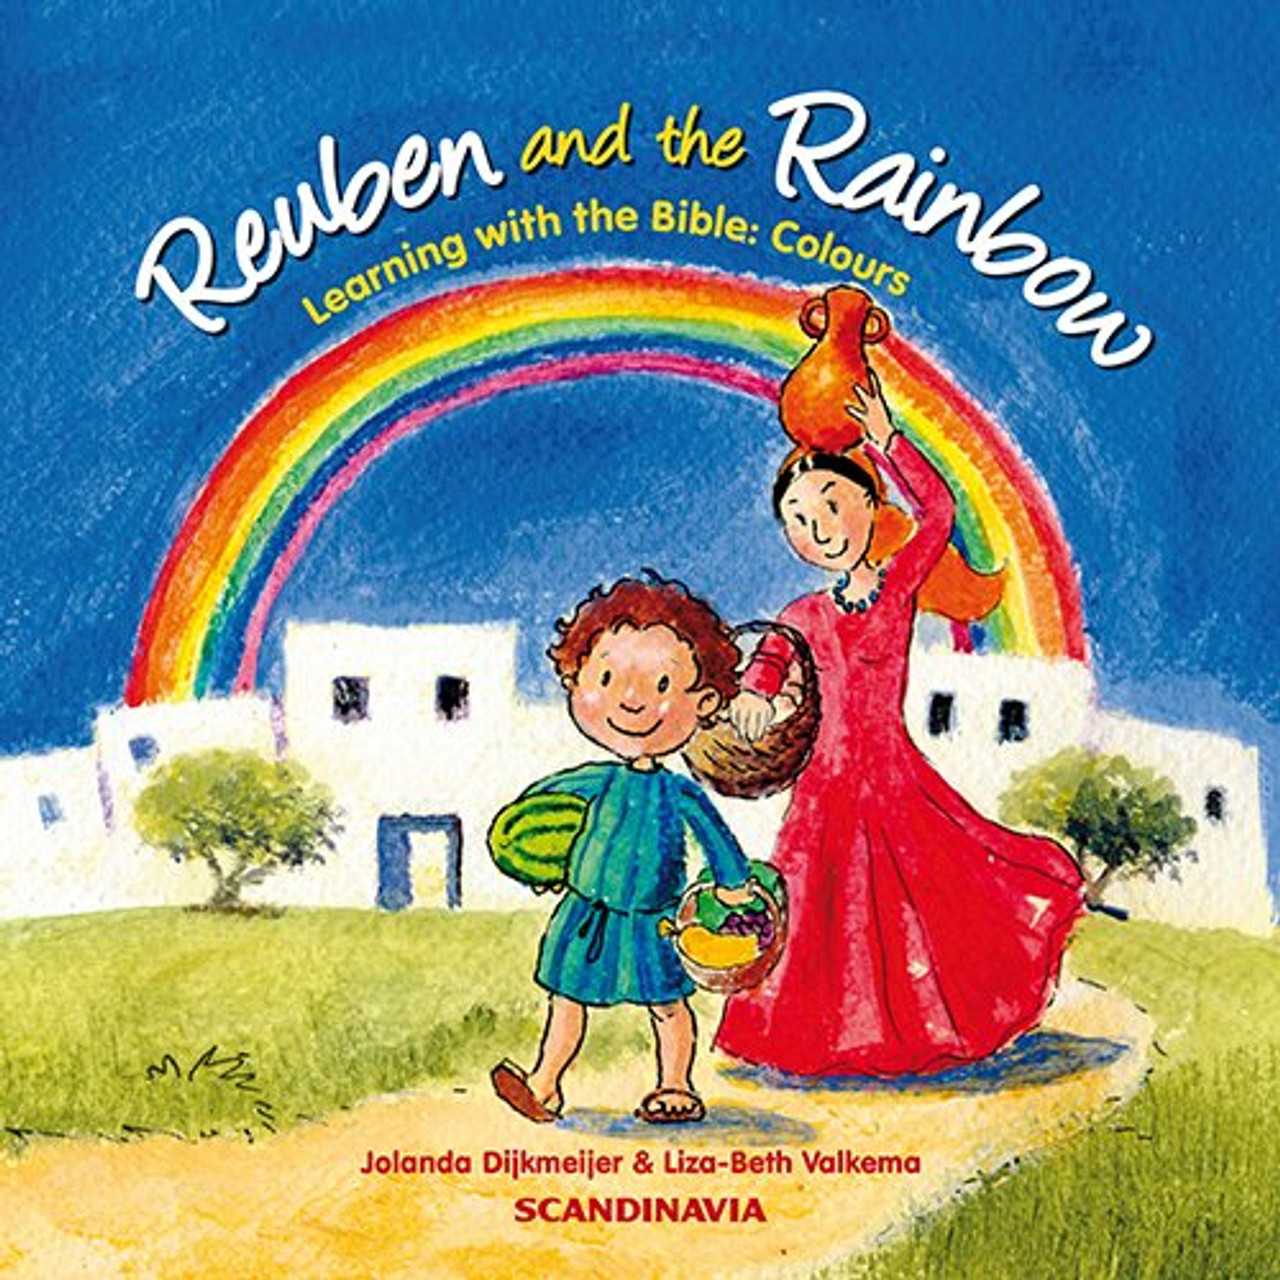 Reuben and the Rainbow: Learning with the Bible with Colors